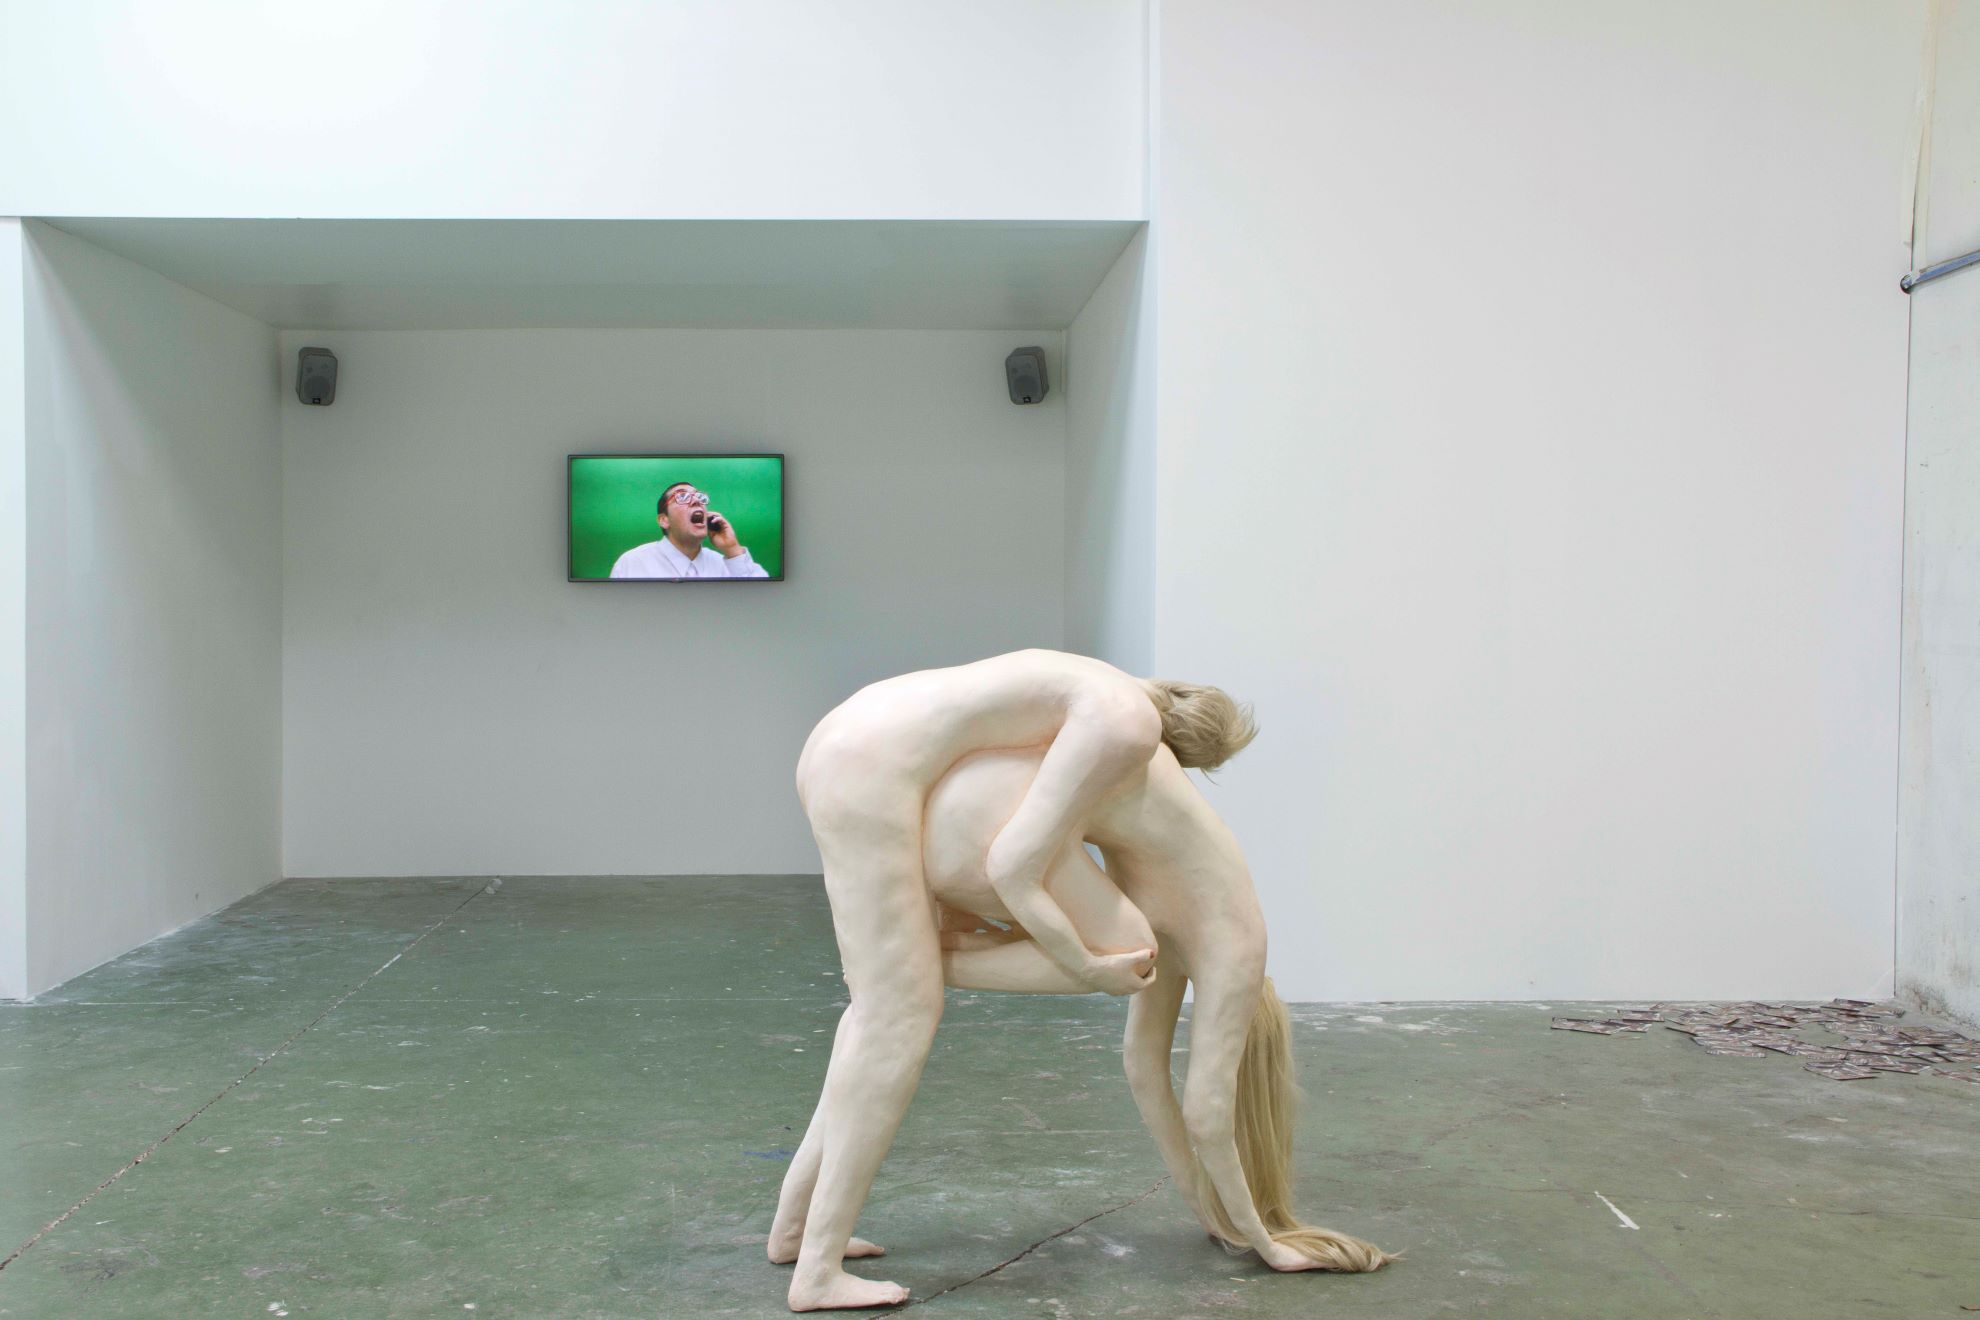 Installation shot of two sculpted figures. One figure is holding the other in a downward position as the other holds them up off the ground.